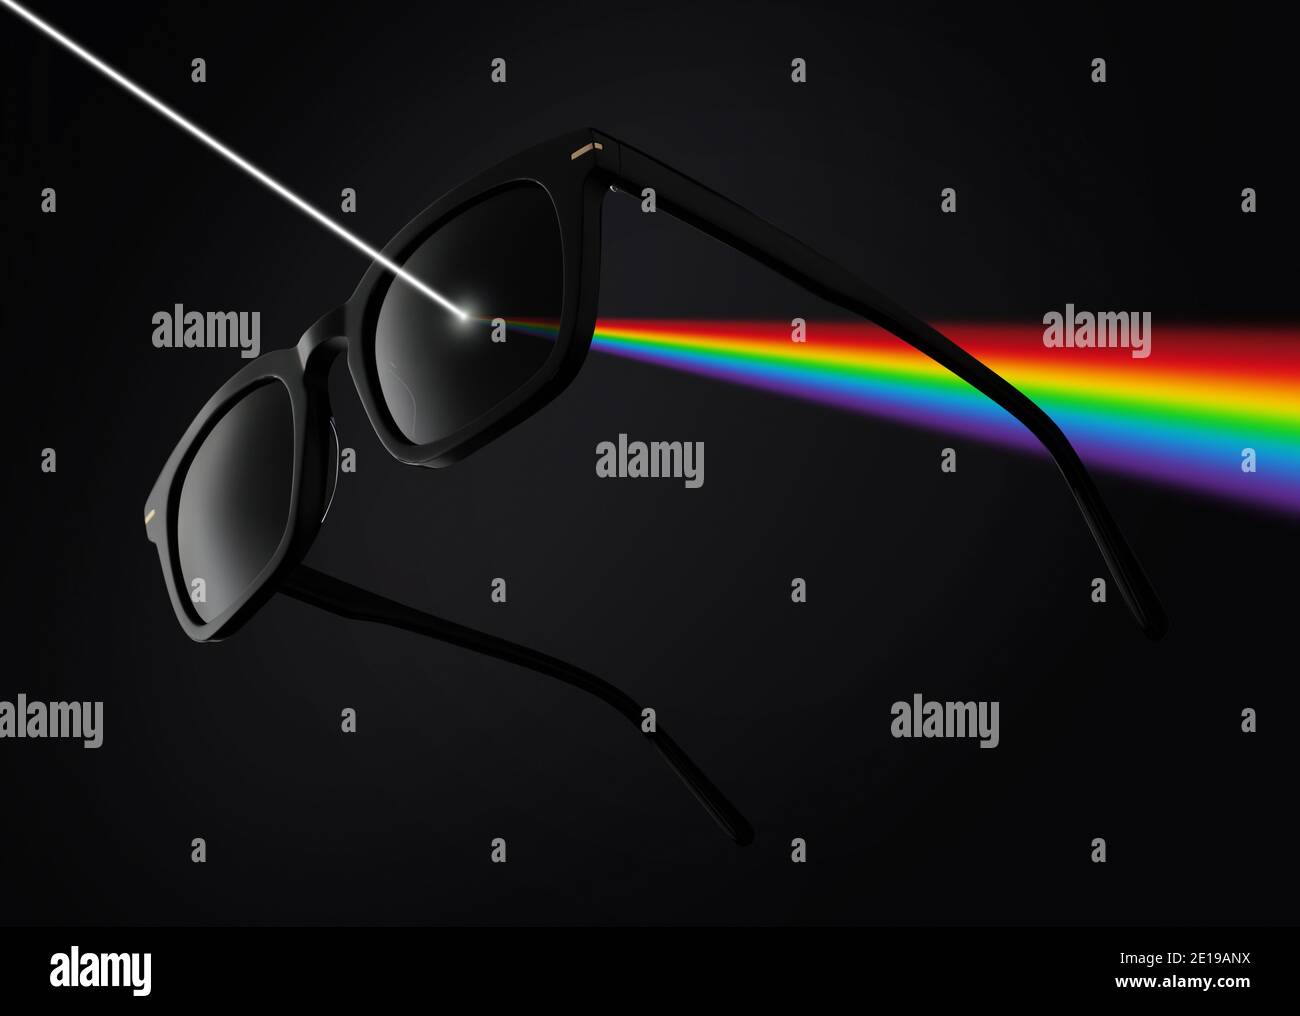 concept of polarized lenses, sunglasses isolated on black background filter the rays of sunlight, with rainbow colors illustration Stock Photo